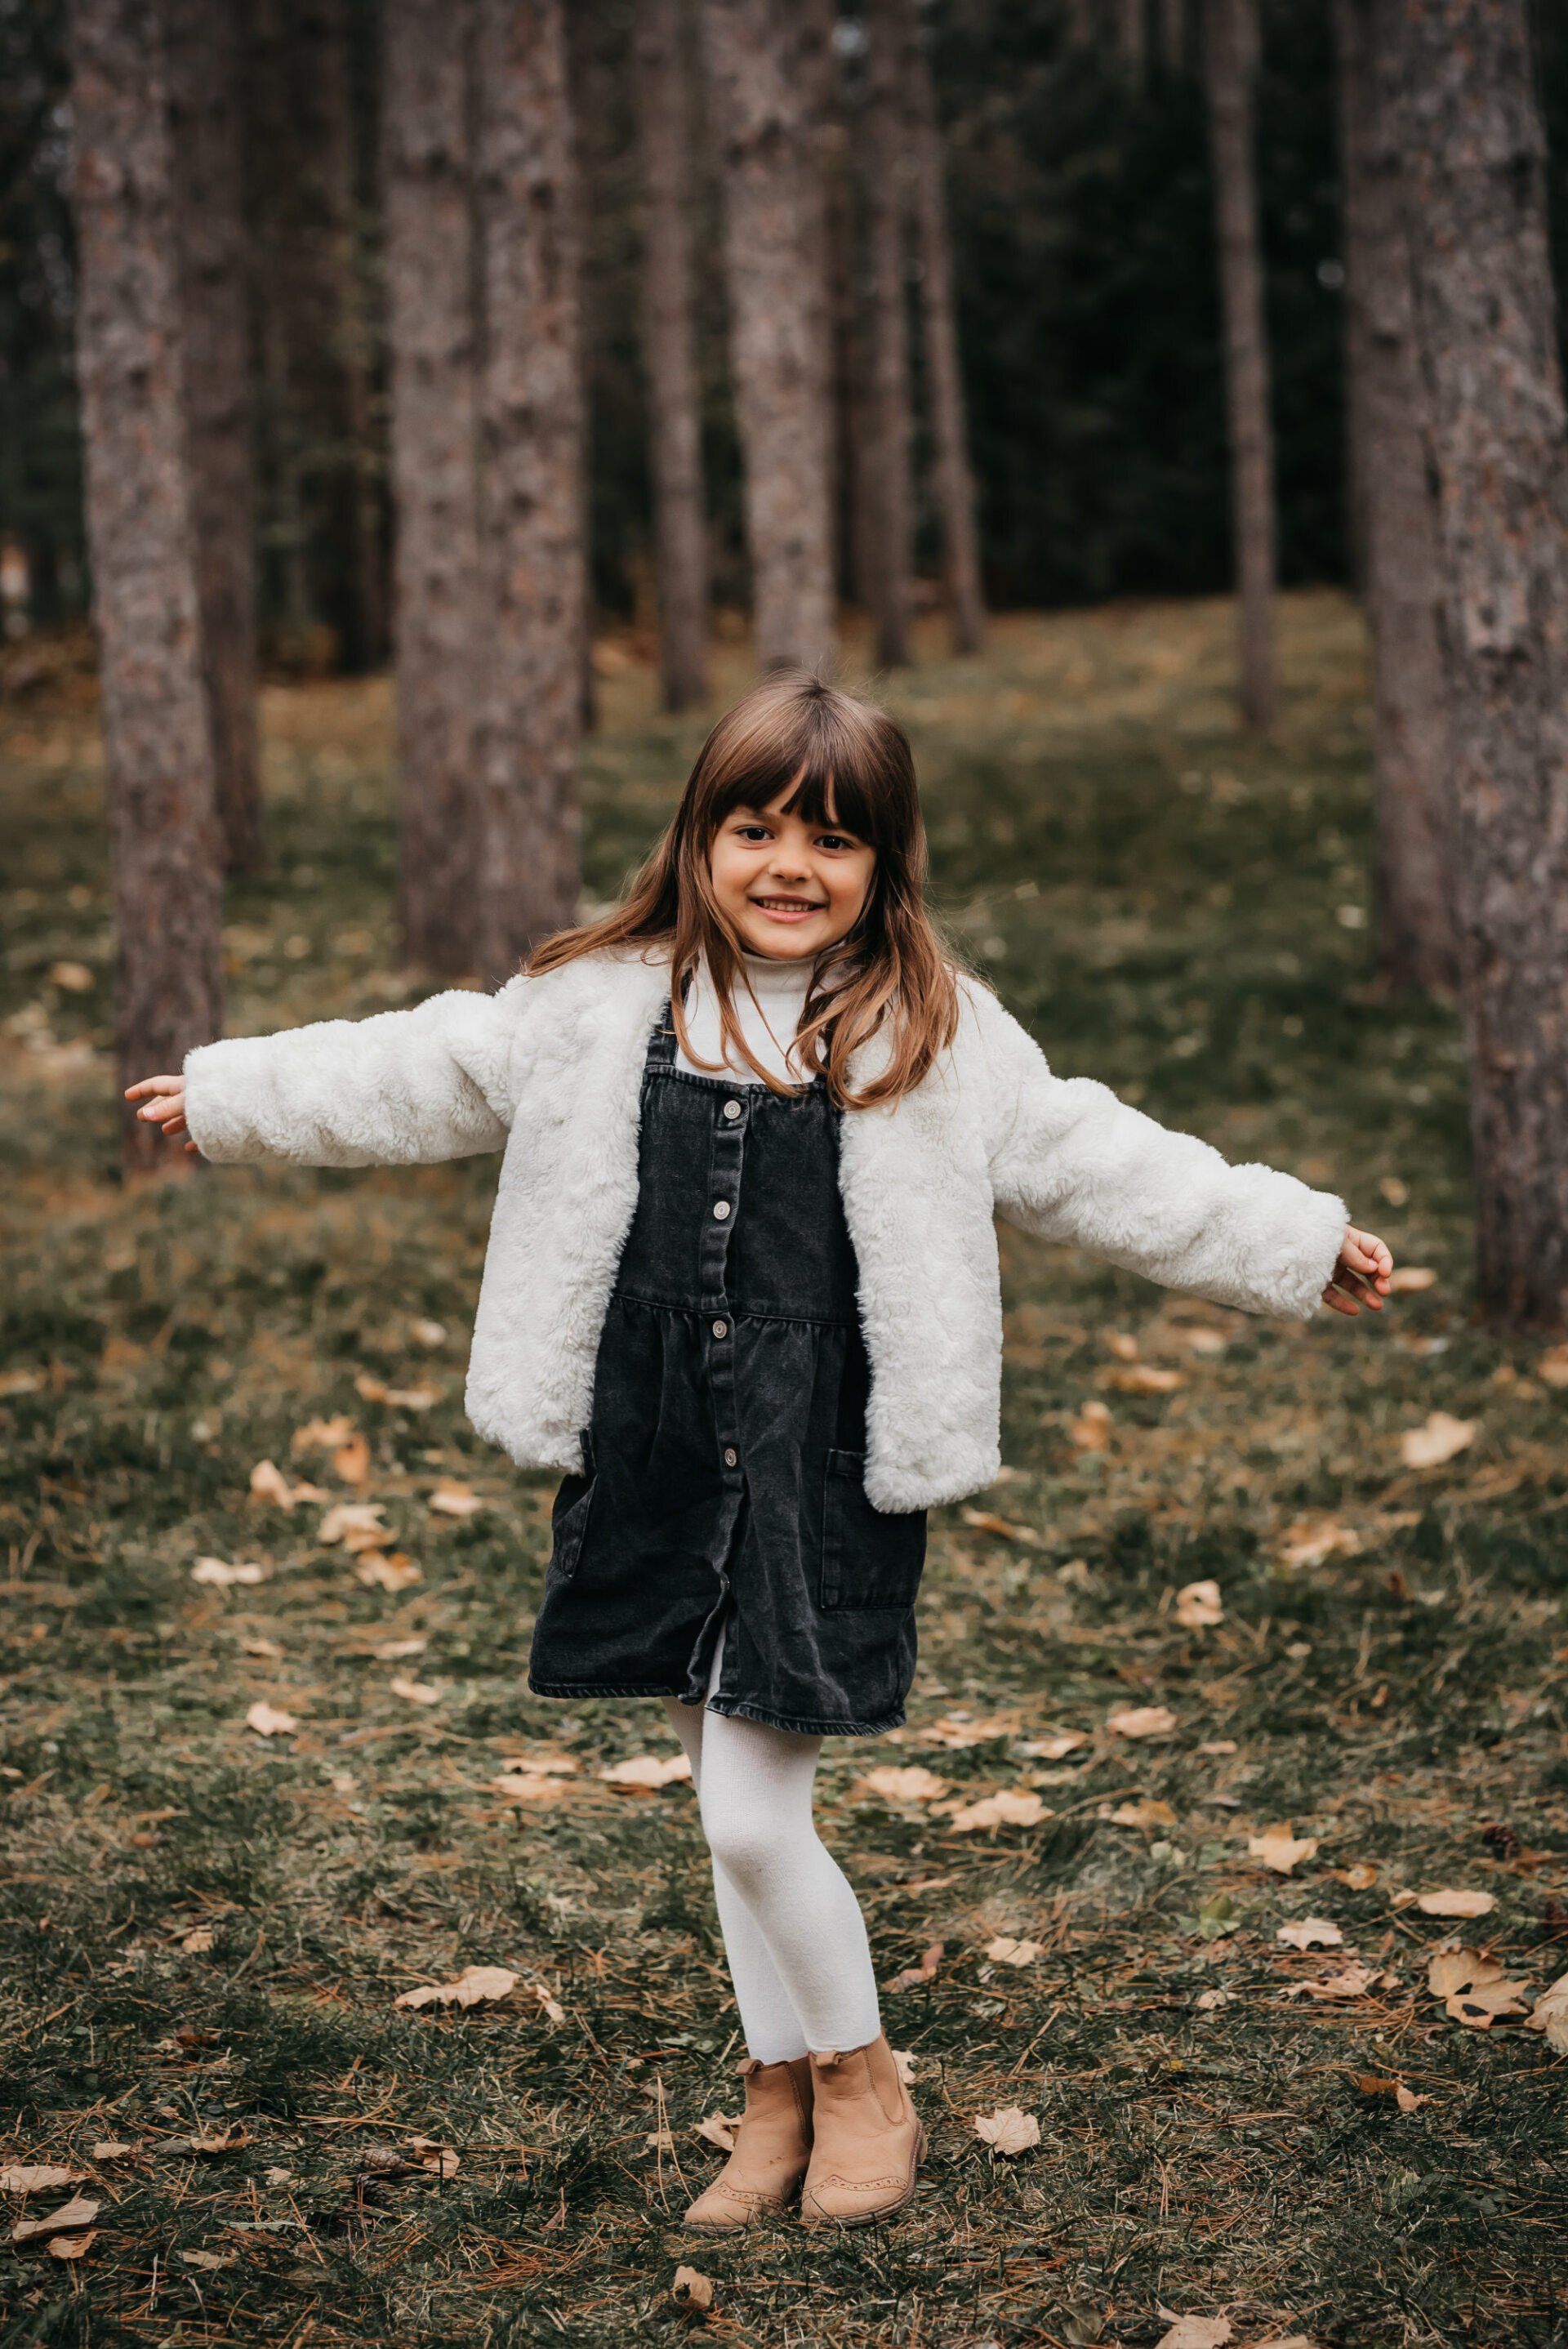 Photo of a small girl with outstretched hands while standing in wooded area for family photography